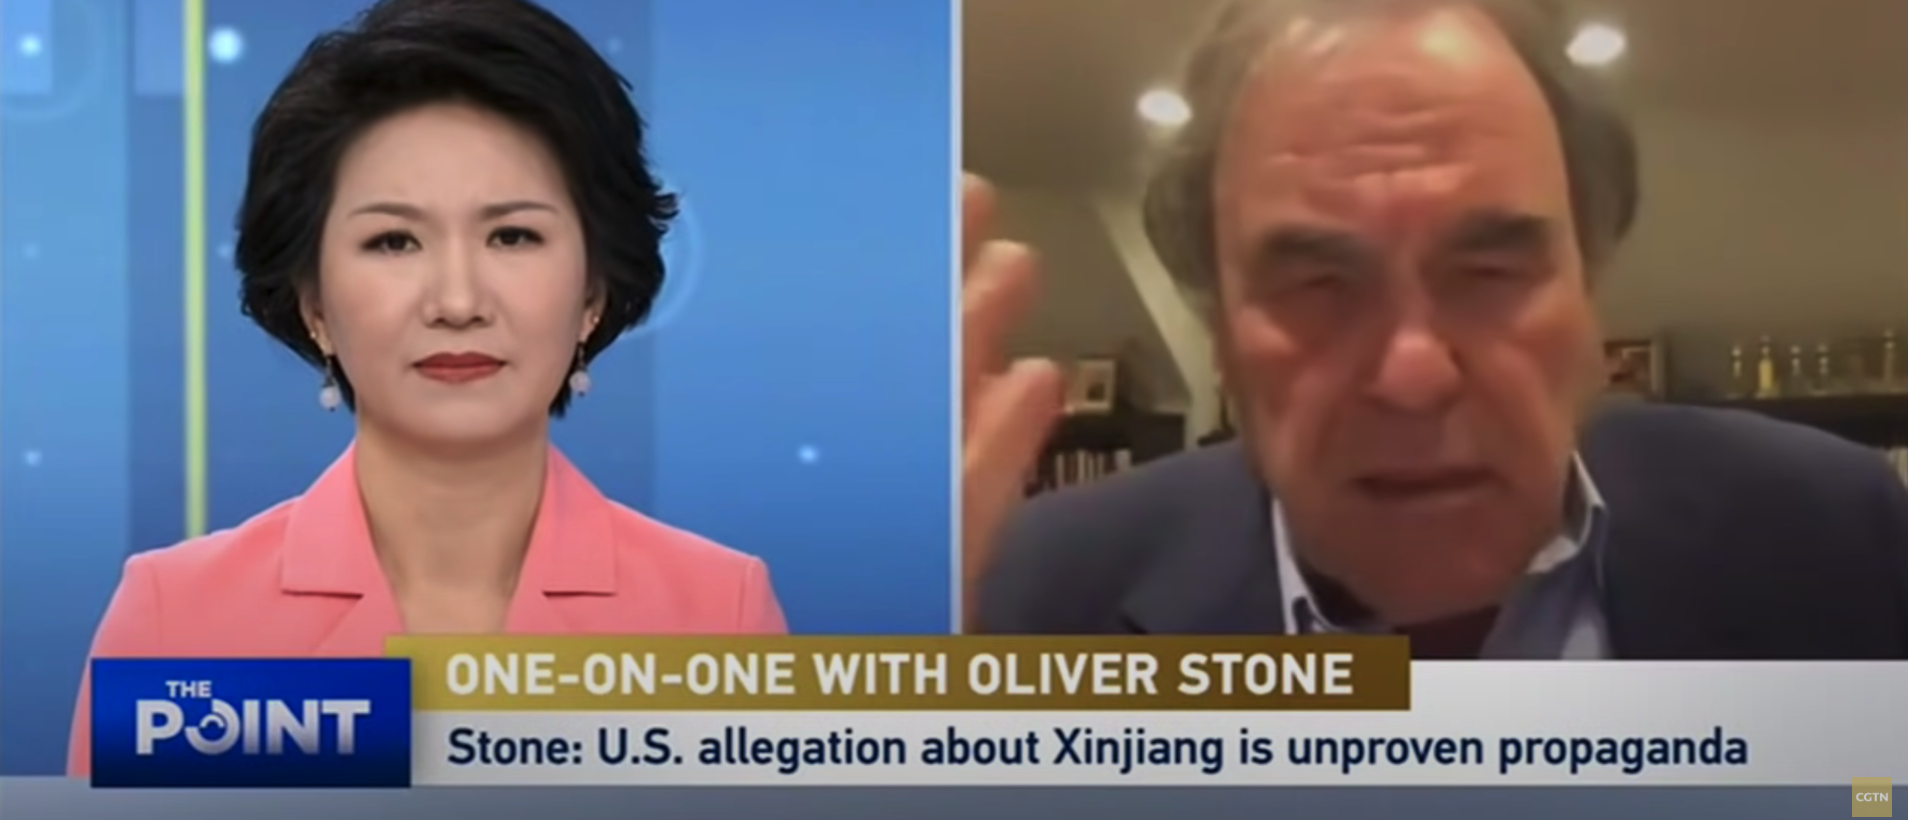 In October 2021, Chinese state media, CGTN, interviewed American film director Oliver Stone, who downplayed the historical threat of the Soviet Union, lamented racism in the U.S., likened the U.S. military to the Germans "after World War I," called American news "propaganda," rejected the idea Huawei was a danger, and also called “accusations” about the Uyghur genocide “insane,” saying there was “no proof.” [YouTube/Screenshot/CGTN]